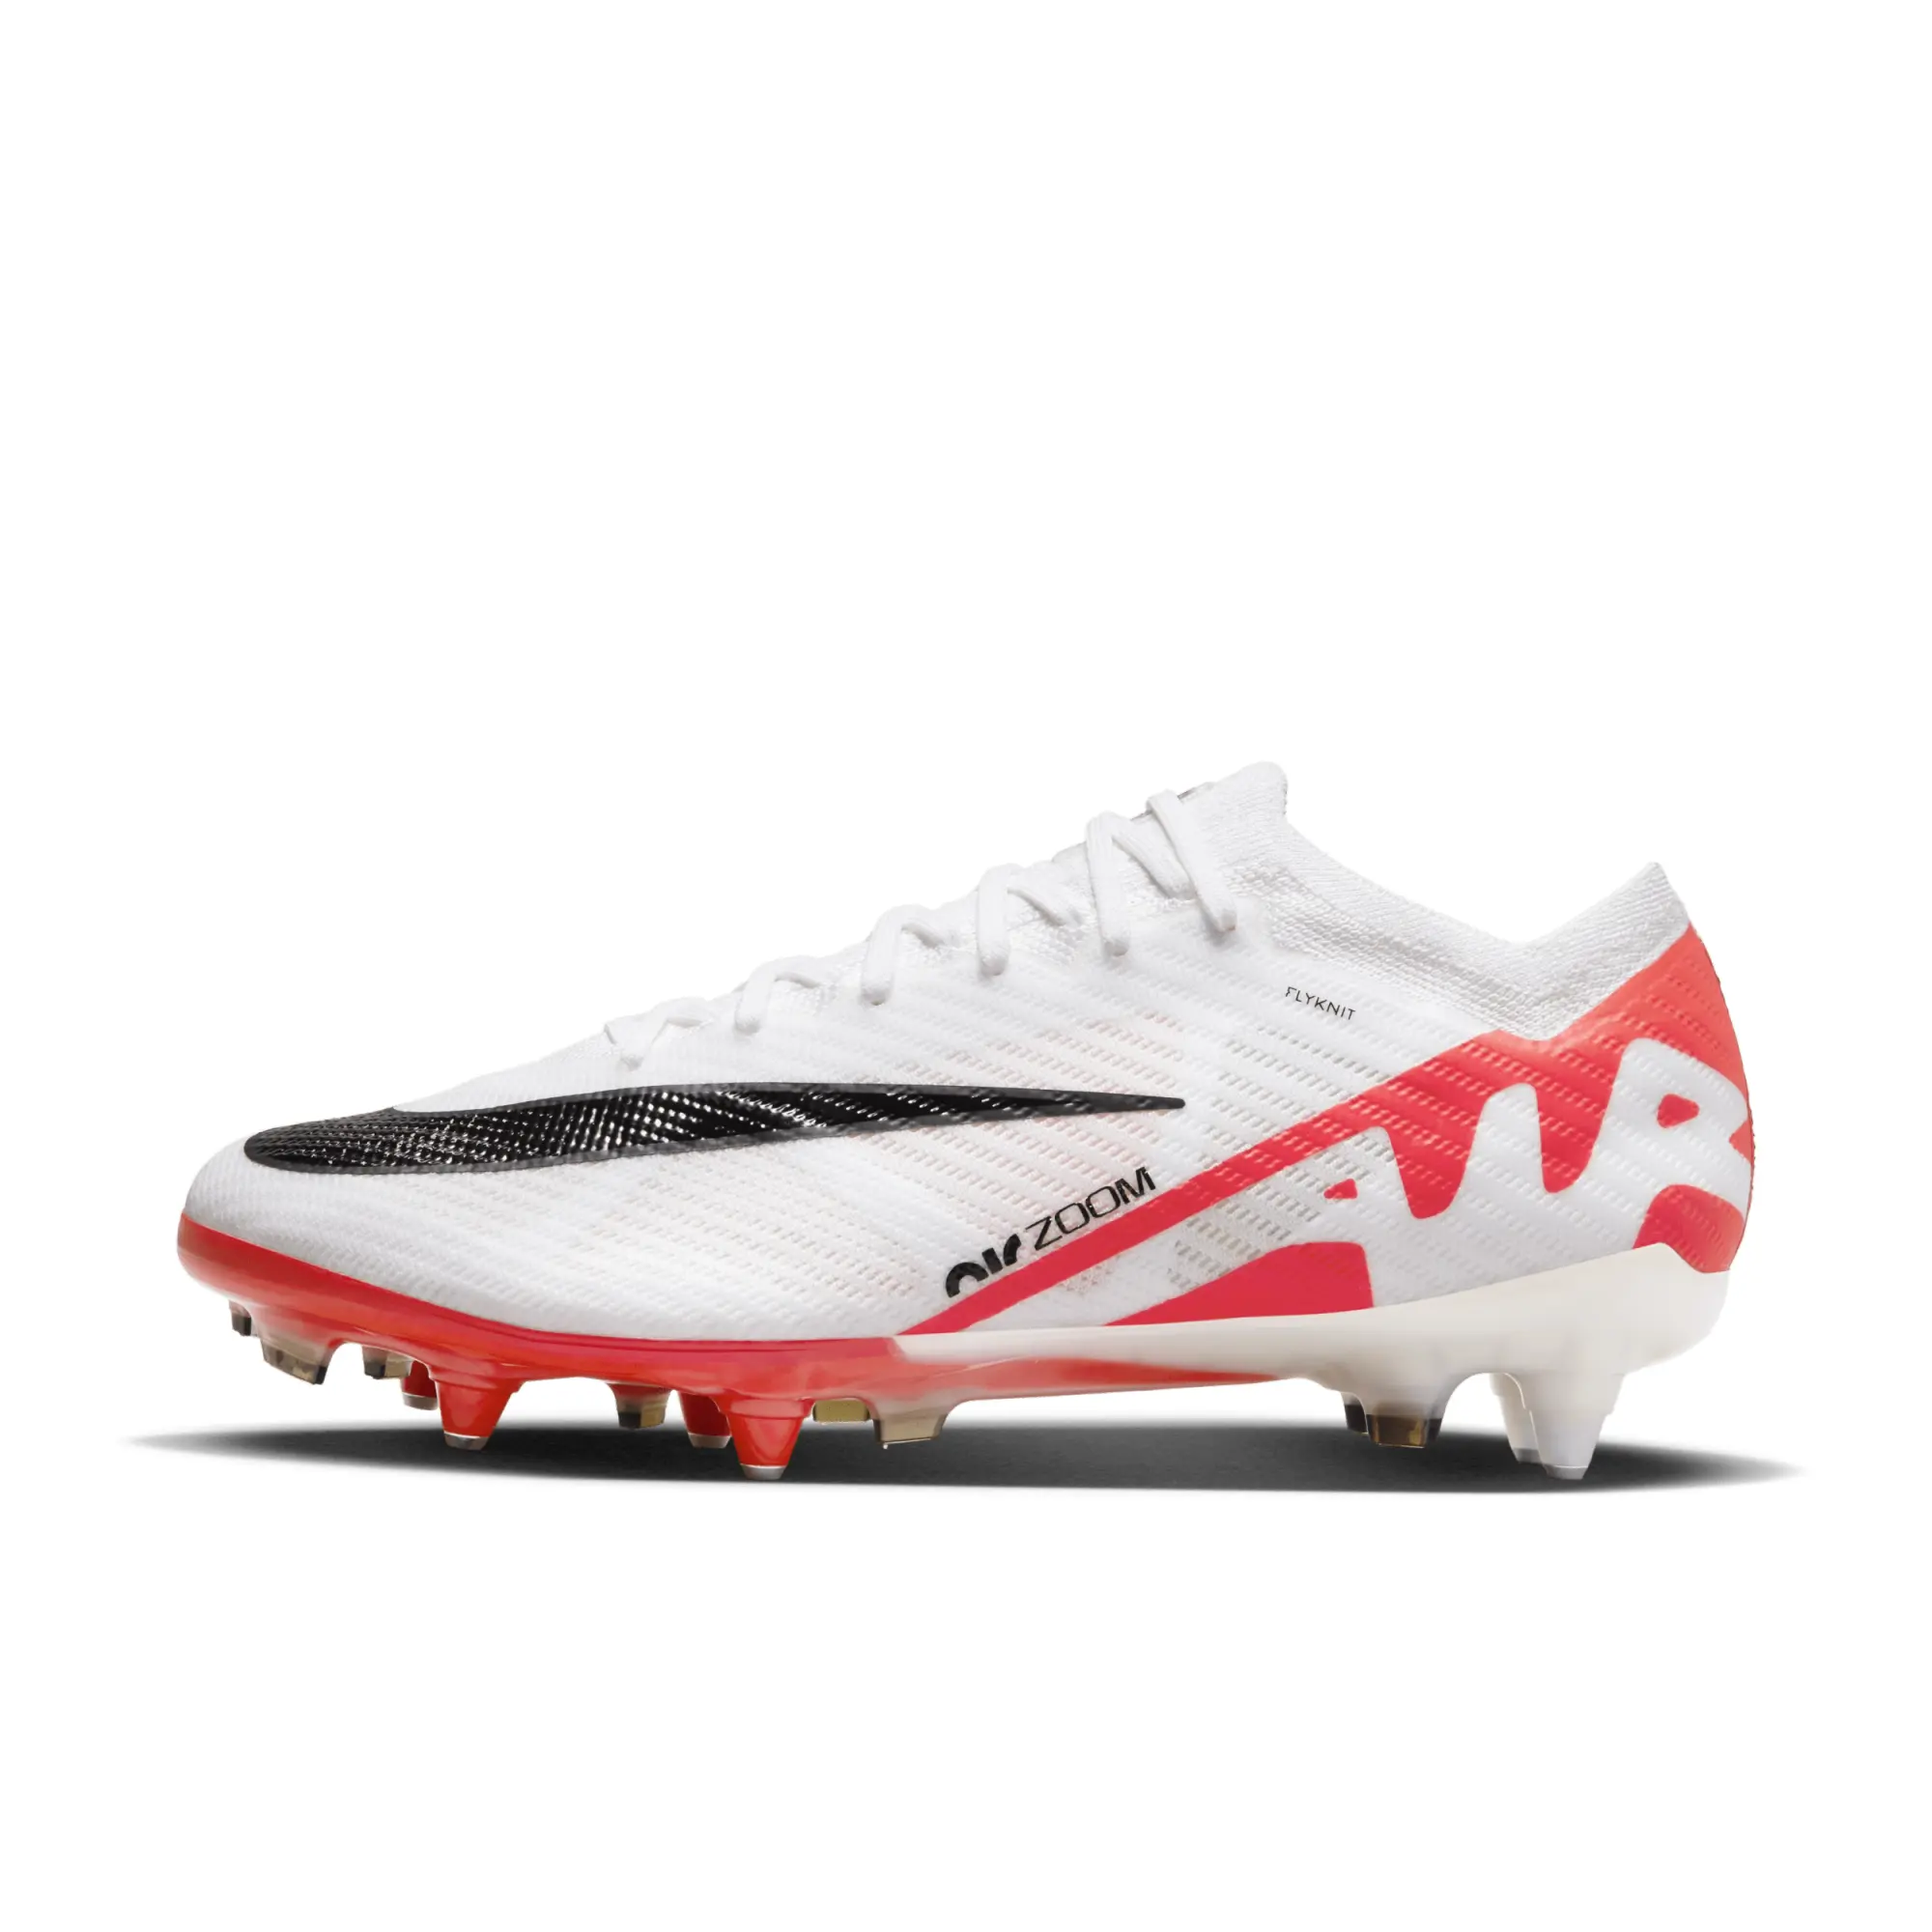 Nike Mercurial Vapor 15 Elite Soft-Ground Low-Top Football Boot - Red